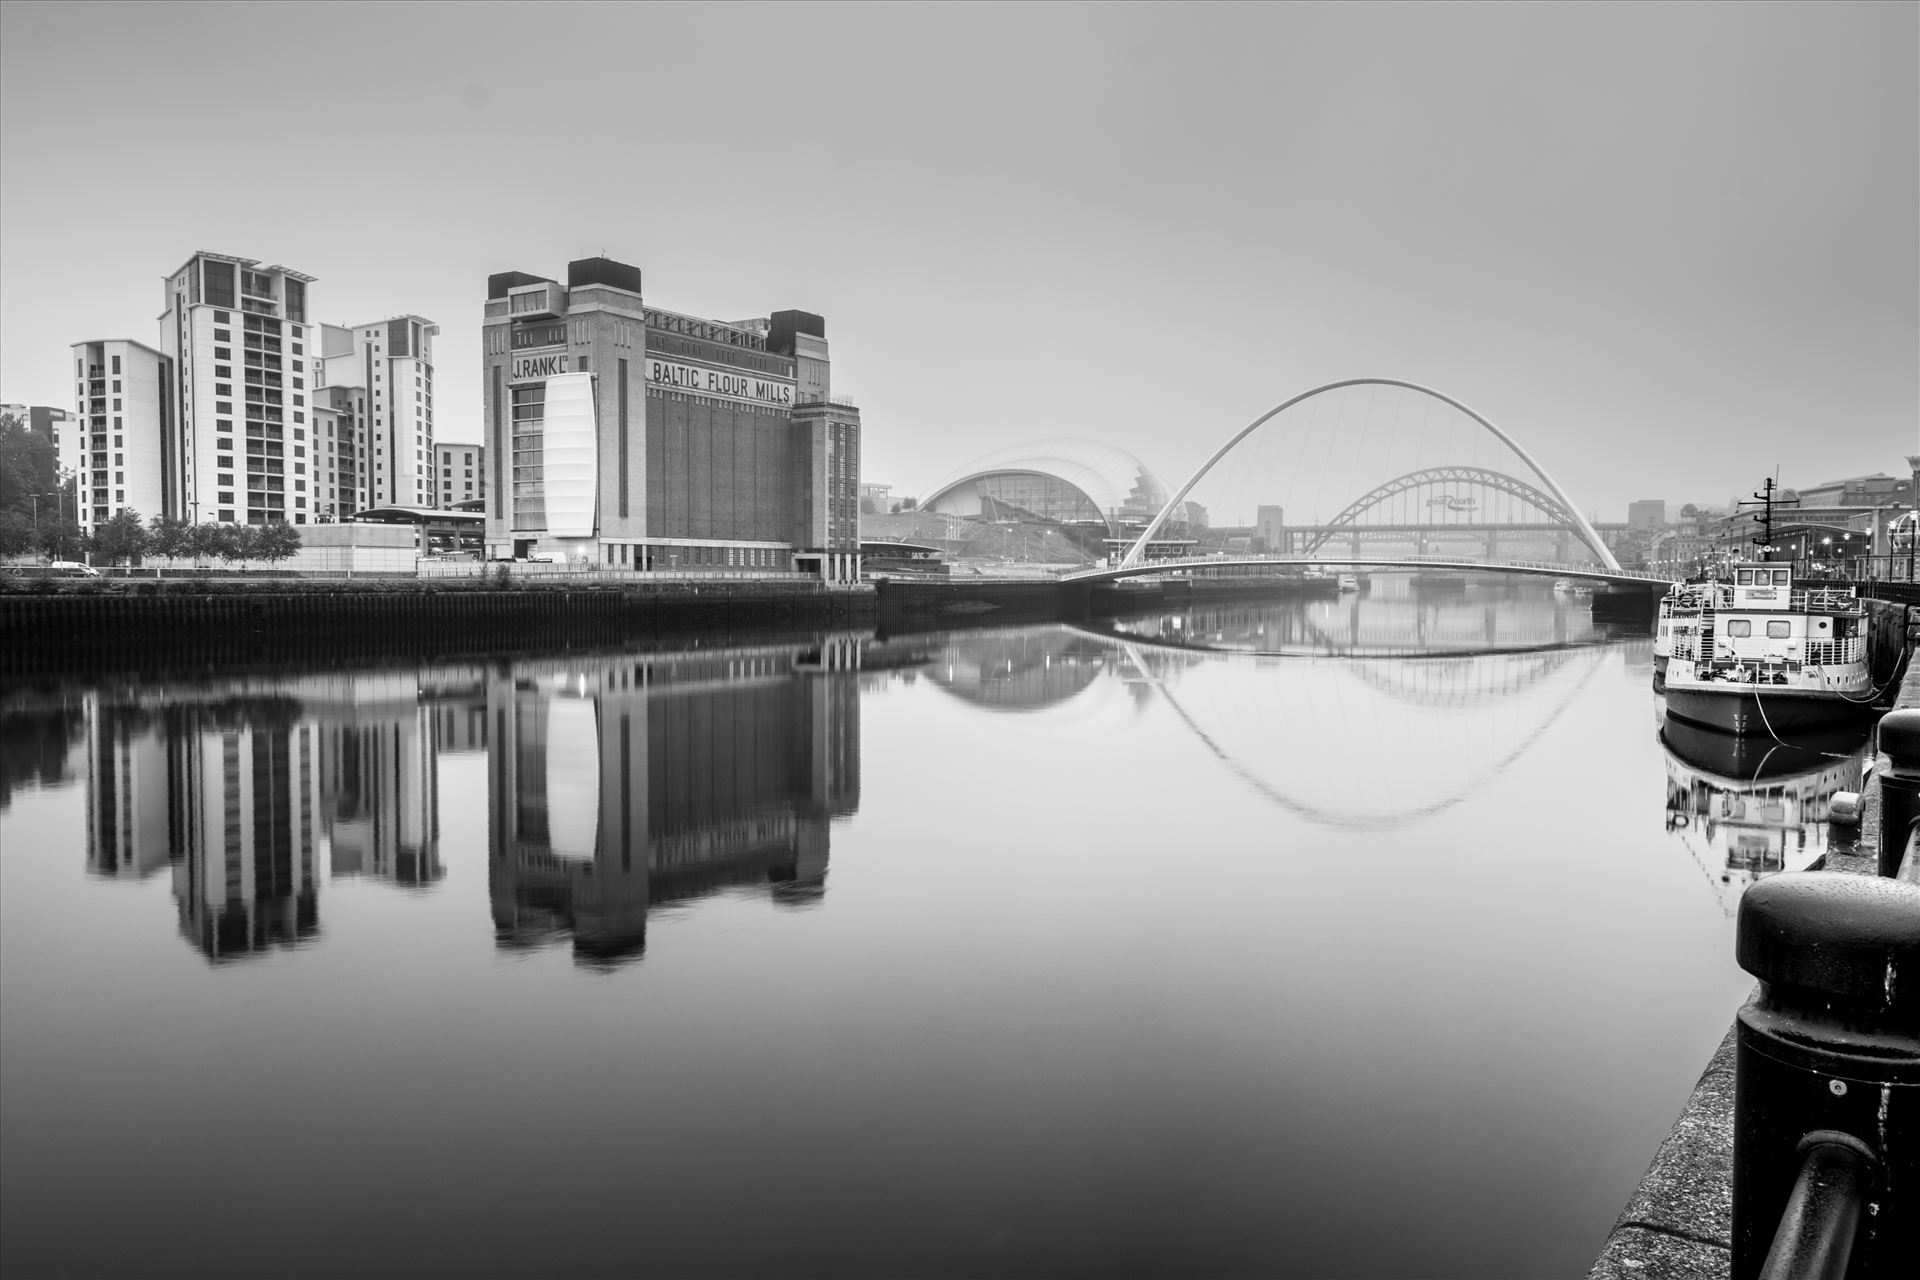 Newcastle/Gateshead Quayside - The Baltic Arts centre on the banks of the River Tyne by philreay